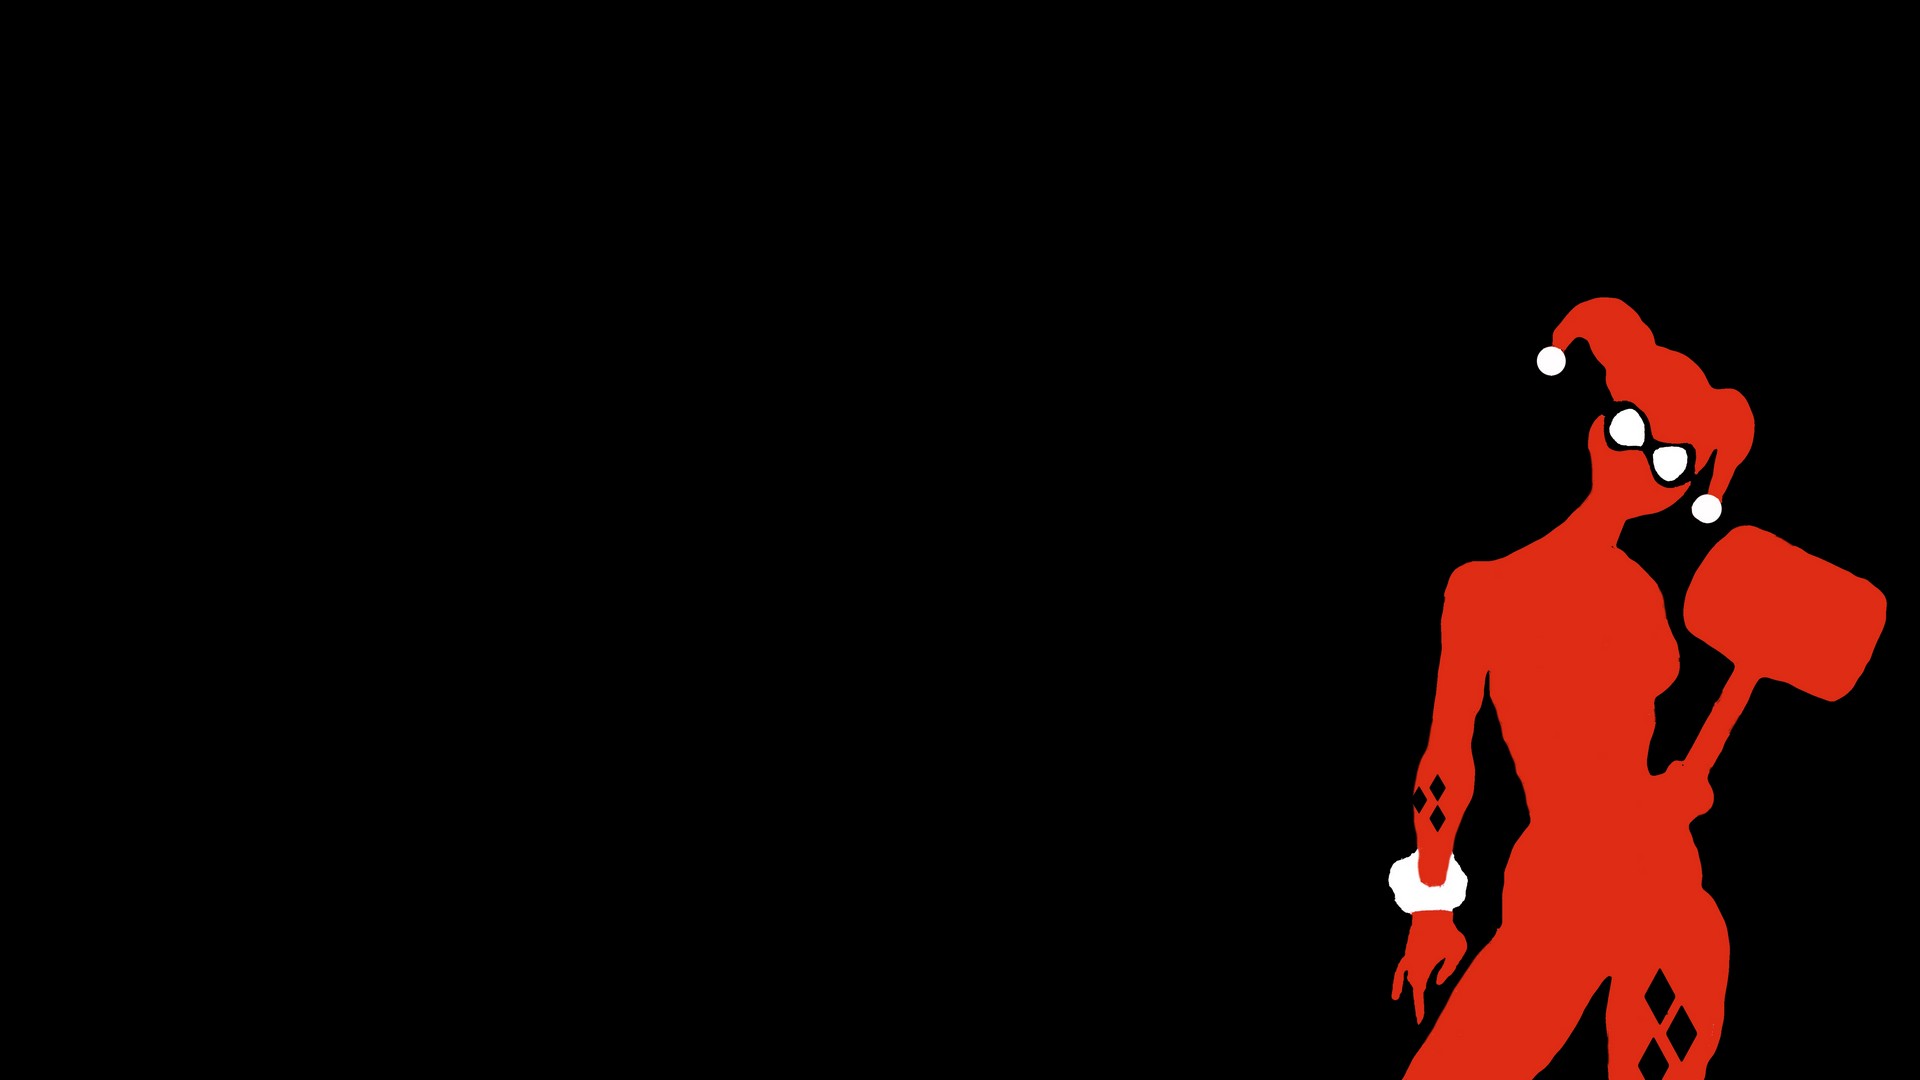 Harley Quinn The Movie Wallpaper with image resolution 1920x1080 pixel. You can use this wallpaper as background for your desktop Computer Screensavers, Android or iPhone smartphones